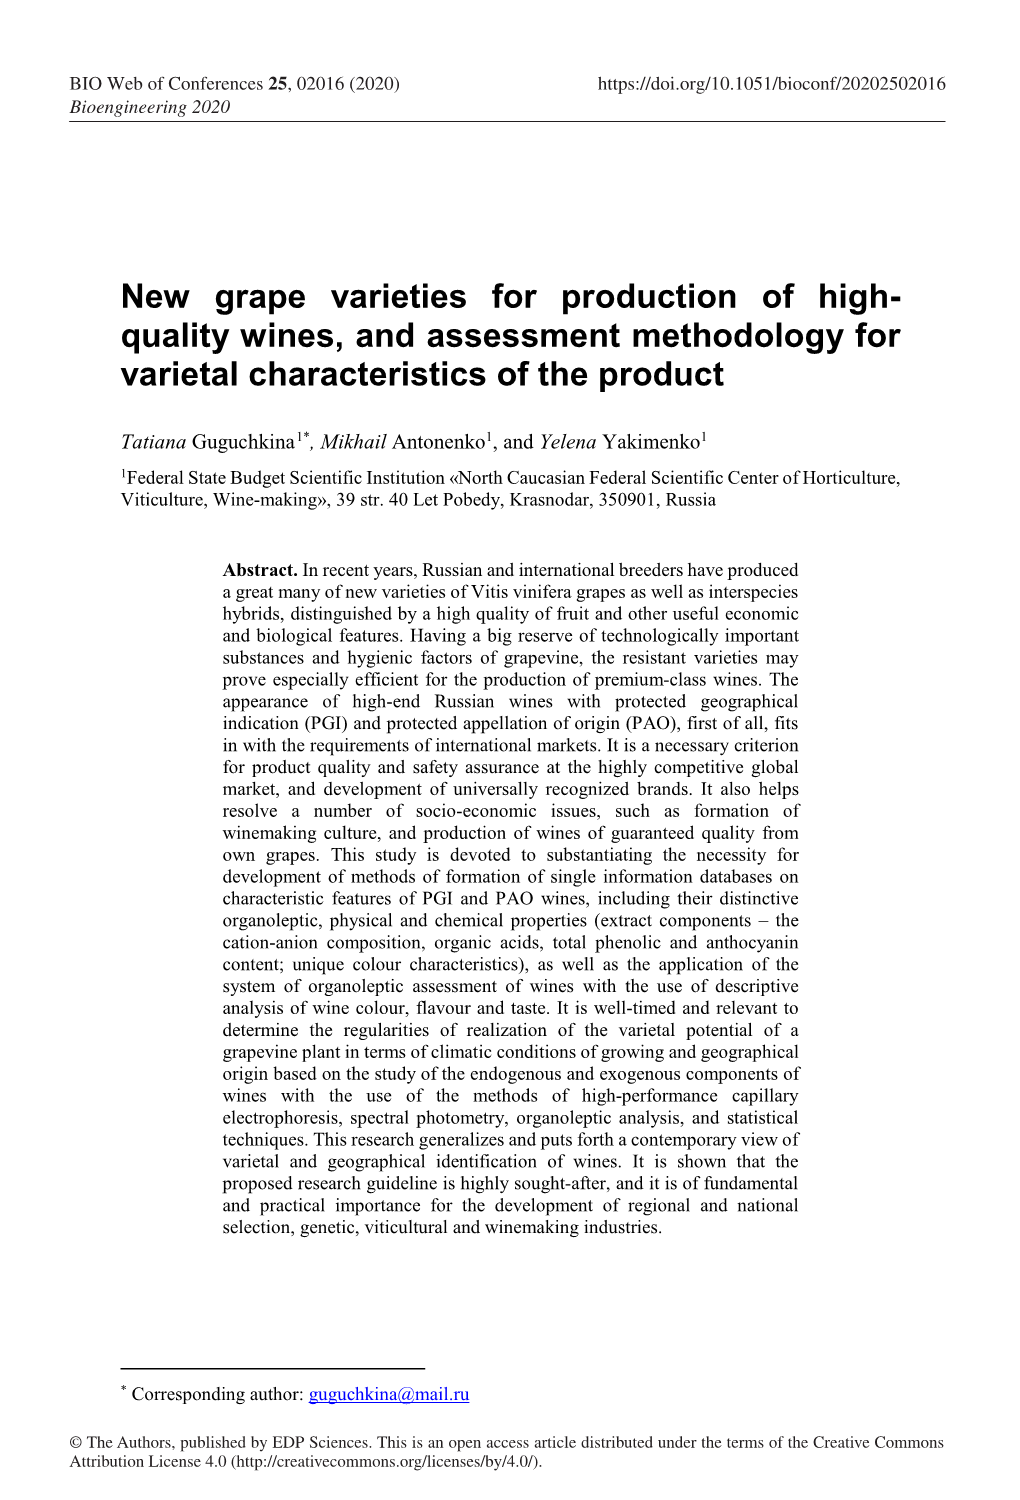 New Grape Varieties for Production of High-Quality Wines, and Assessment Methodology for Varietal Characteristics of the Product